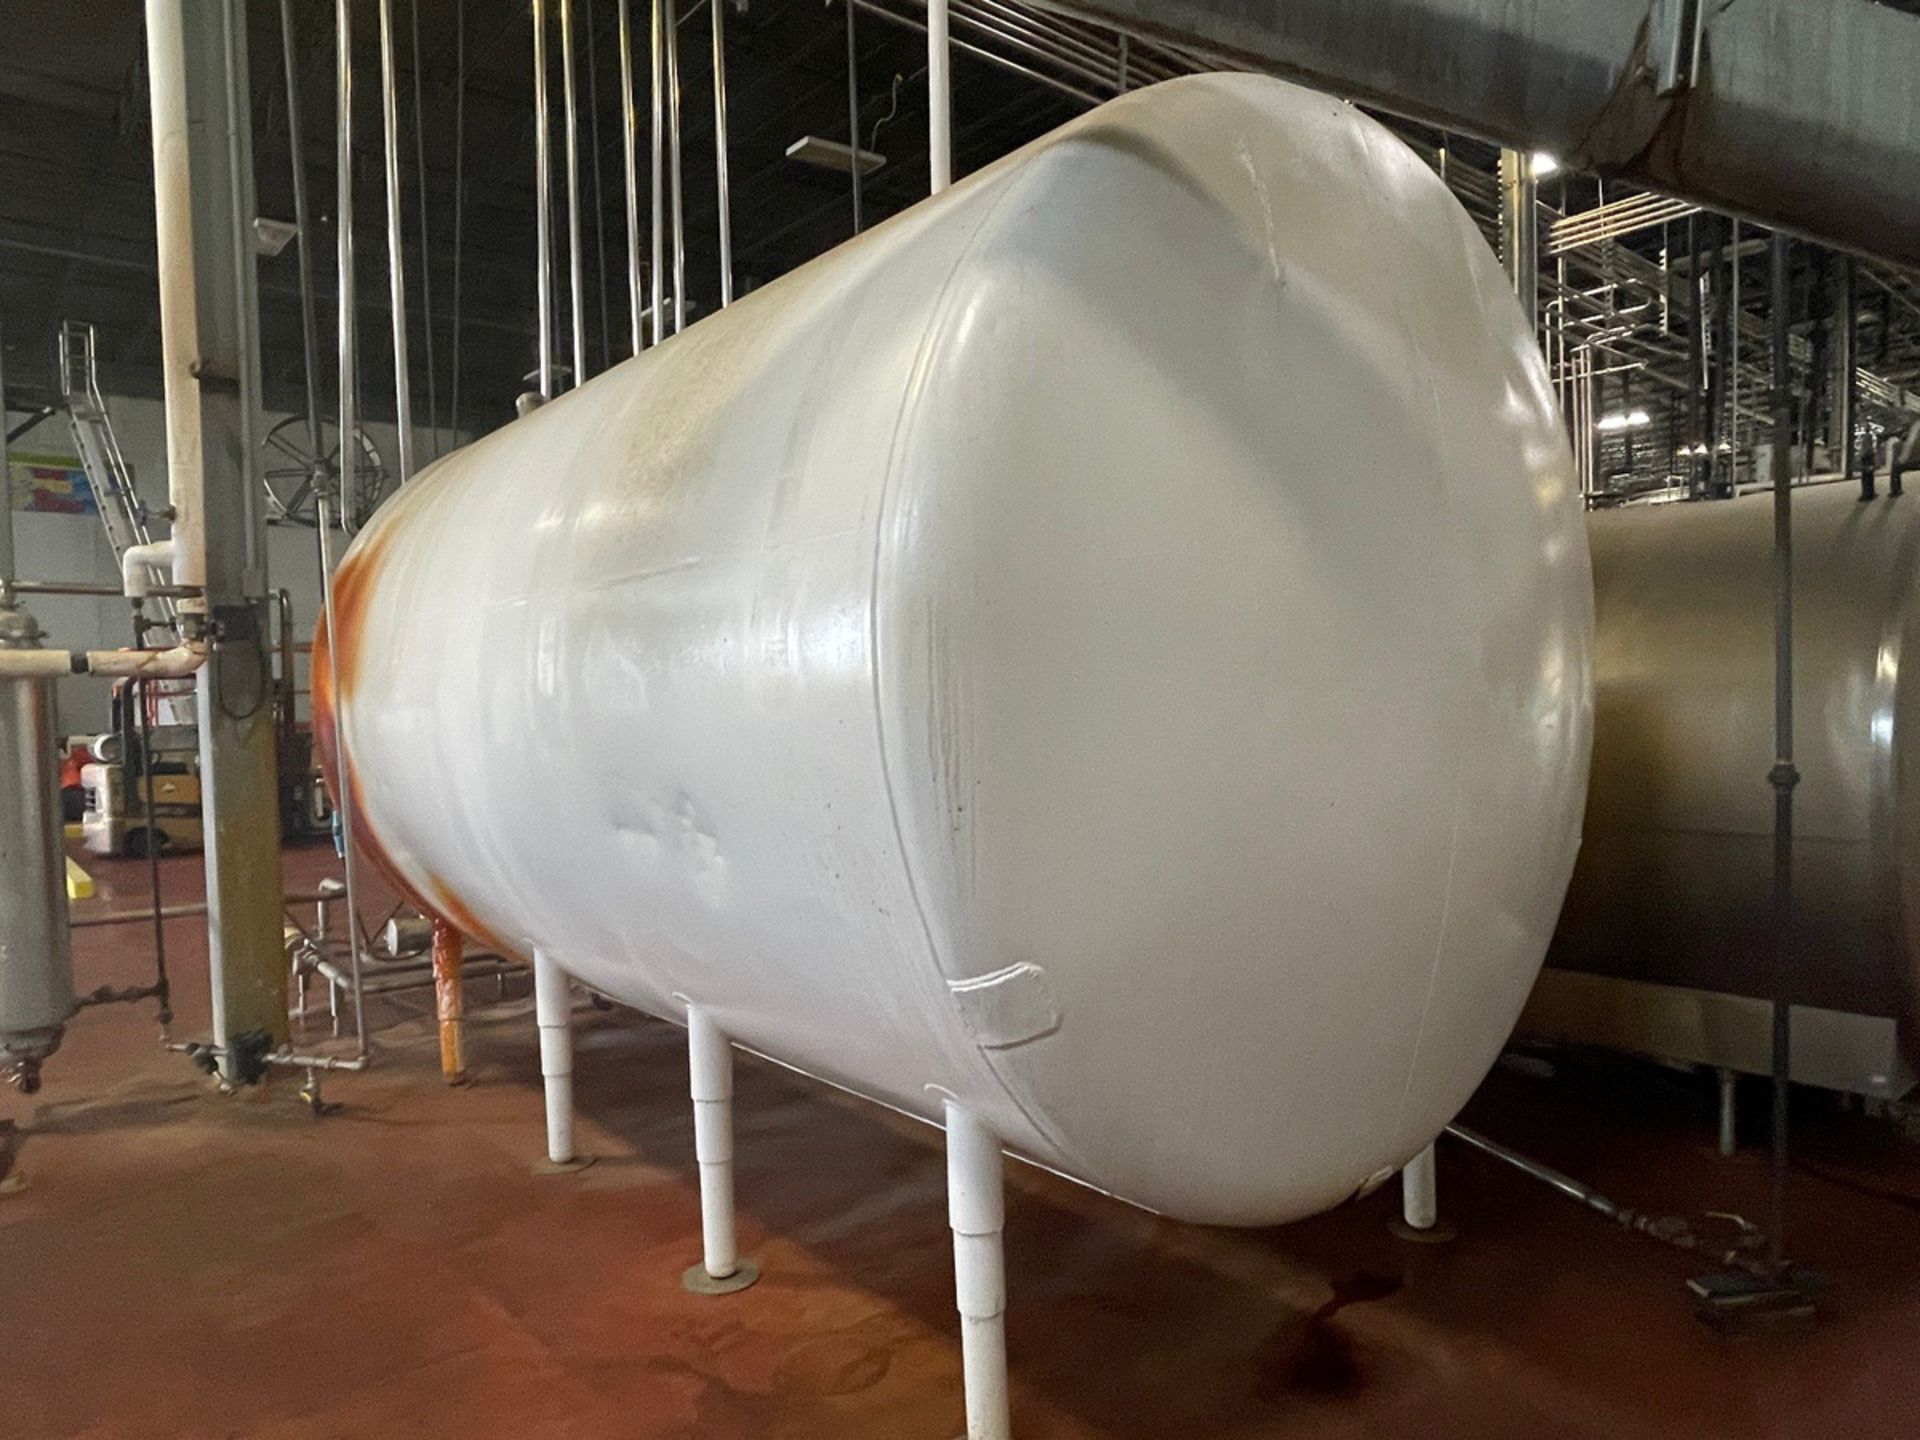 Stainless Steel Hot Liquor Tank, Approx. 9' Diameter and 15' Long | Rig Fee $1500 - Image 2 of 5